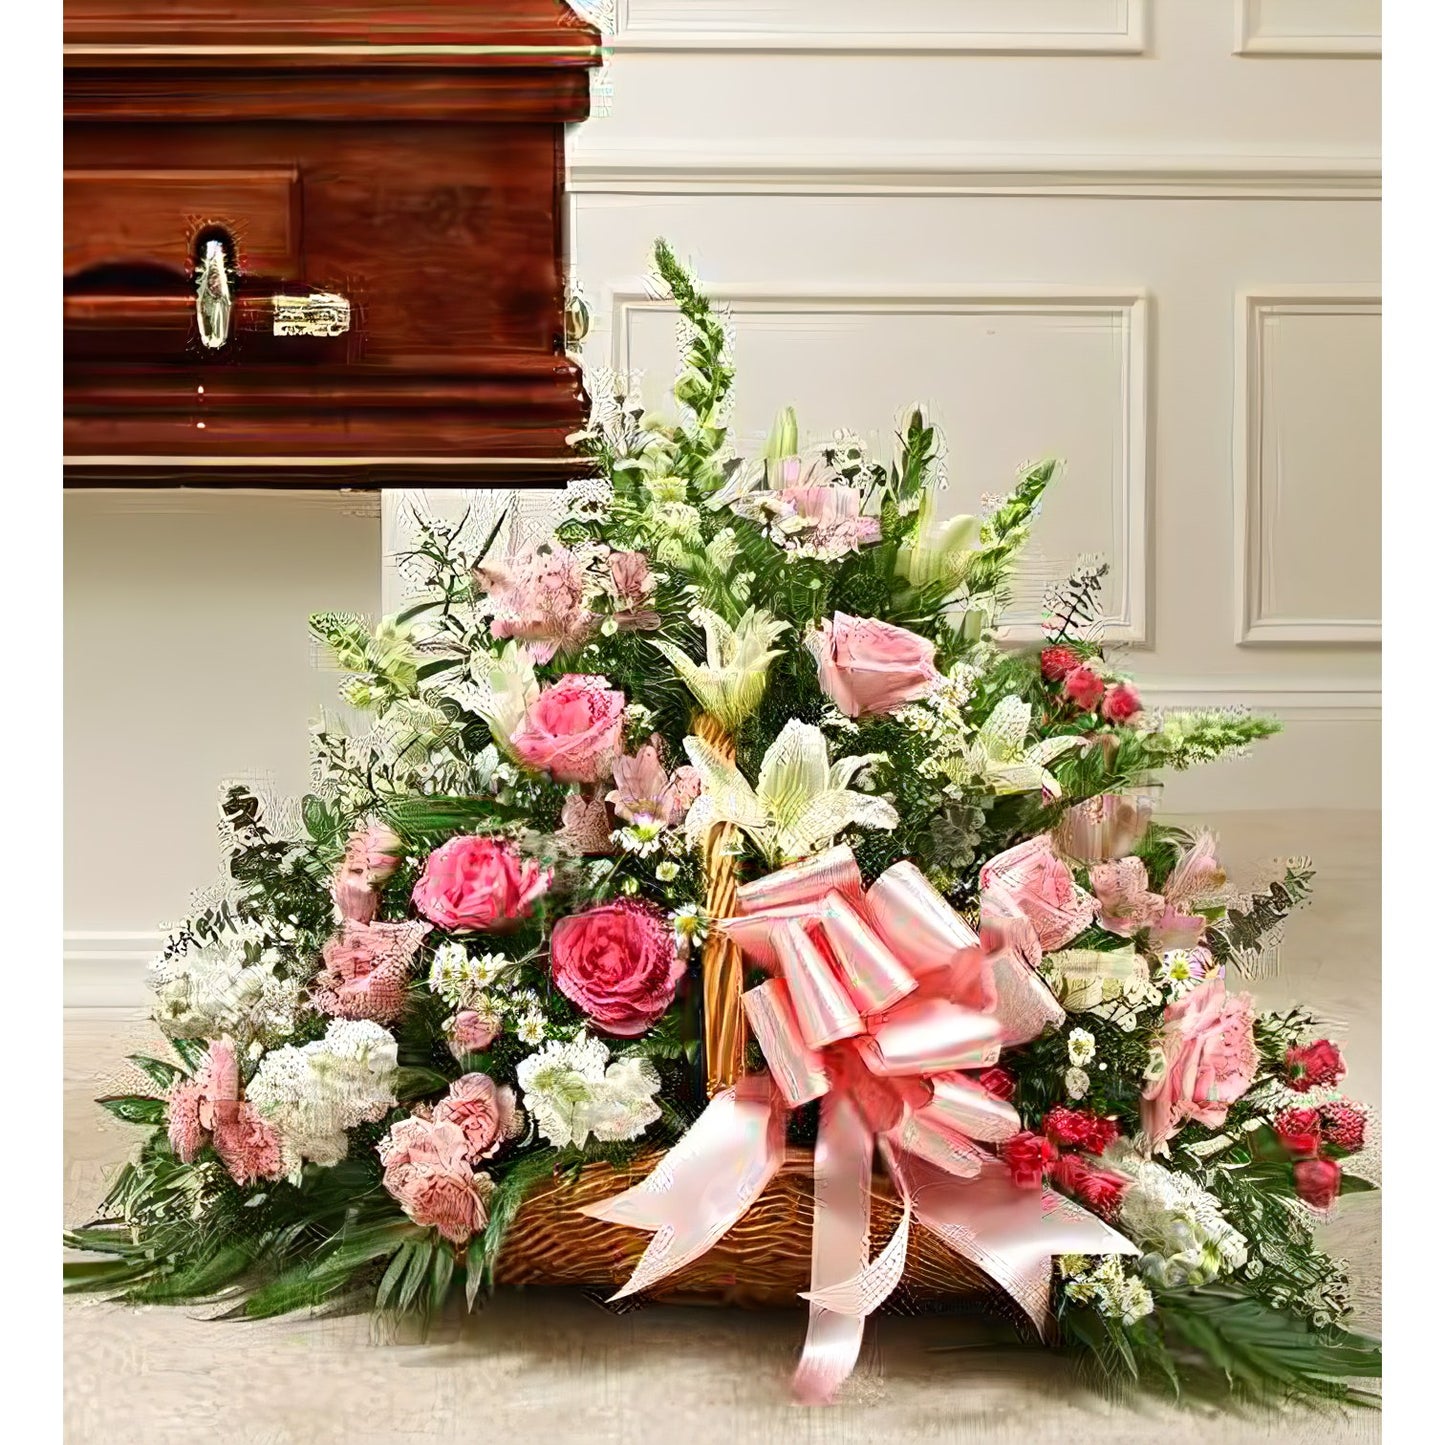 Sincerest Sympathies Fireside Basket-Pink &amp; White - Funeral > For the Service - Queens Flower Delivery